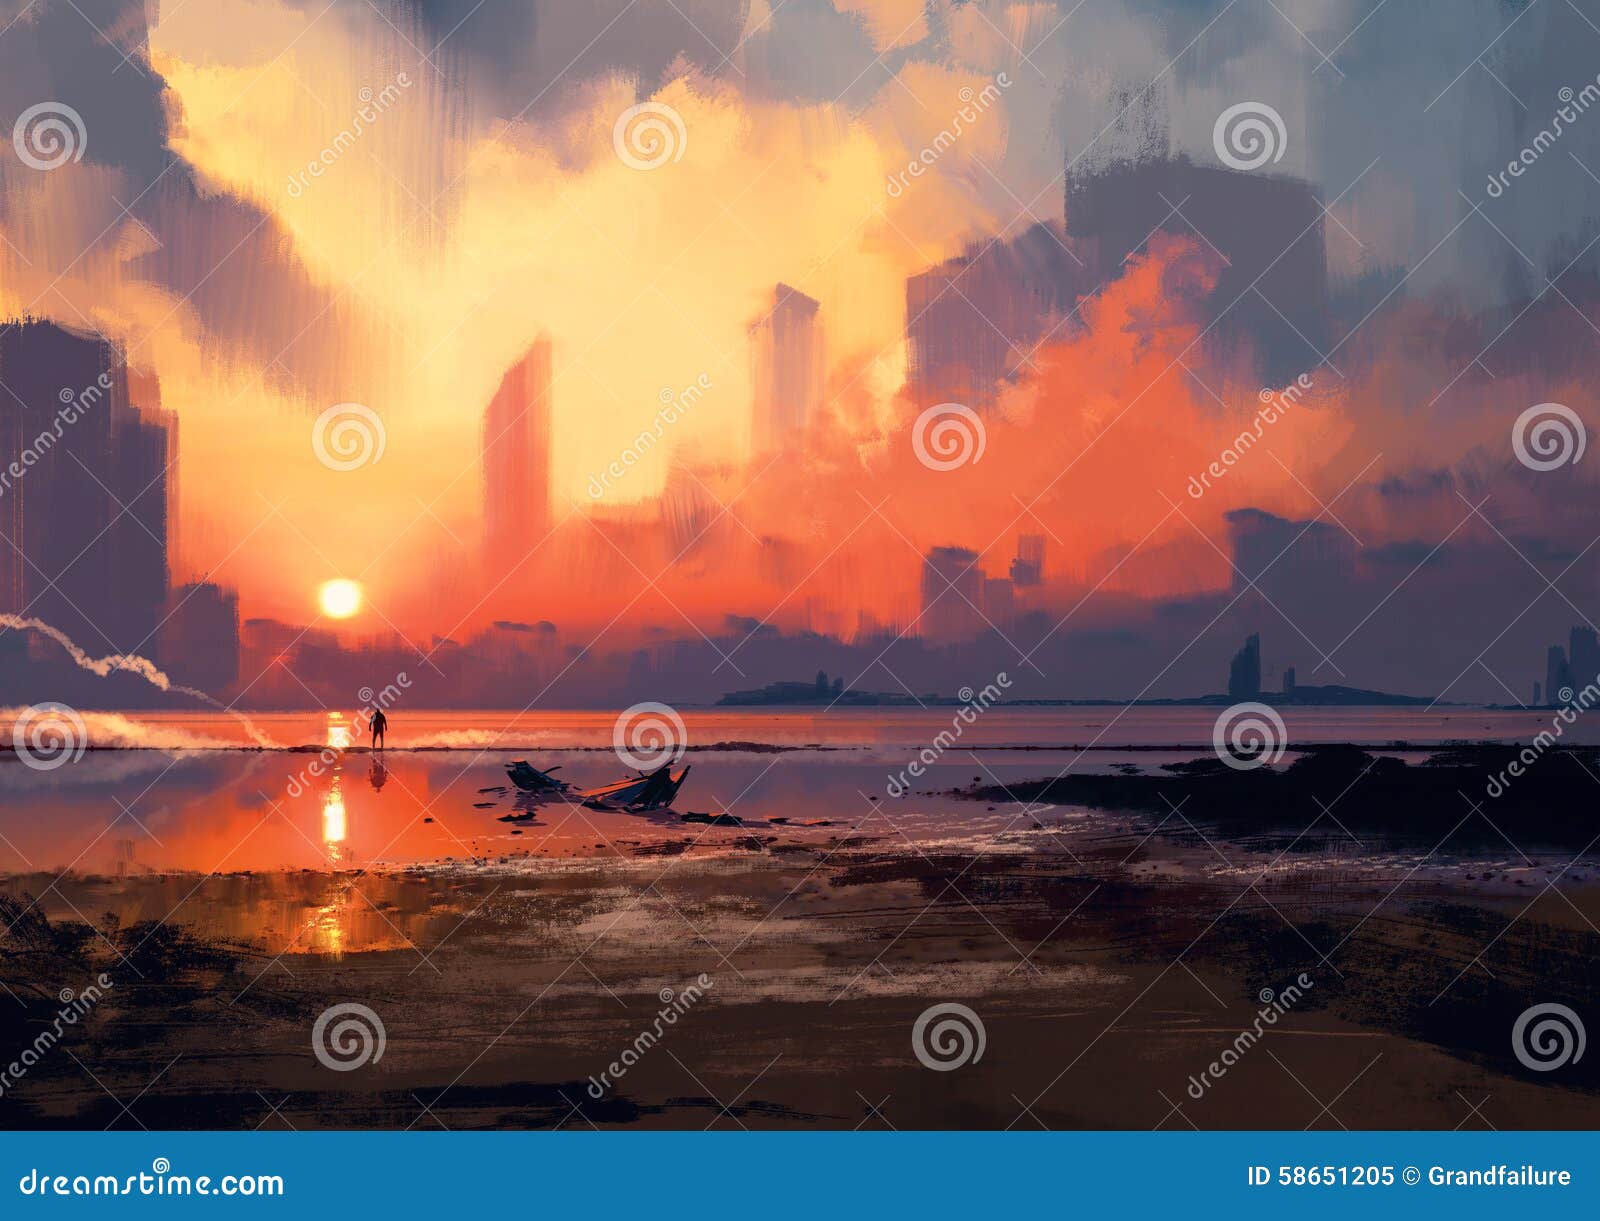 man on sea beach looking at skyscrapers at sunset